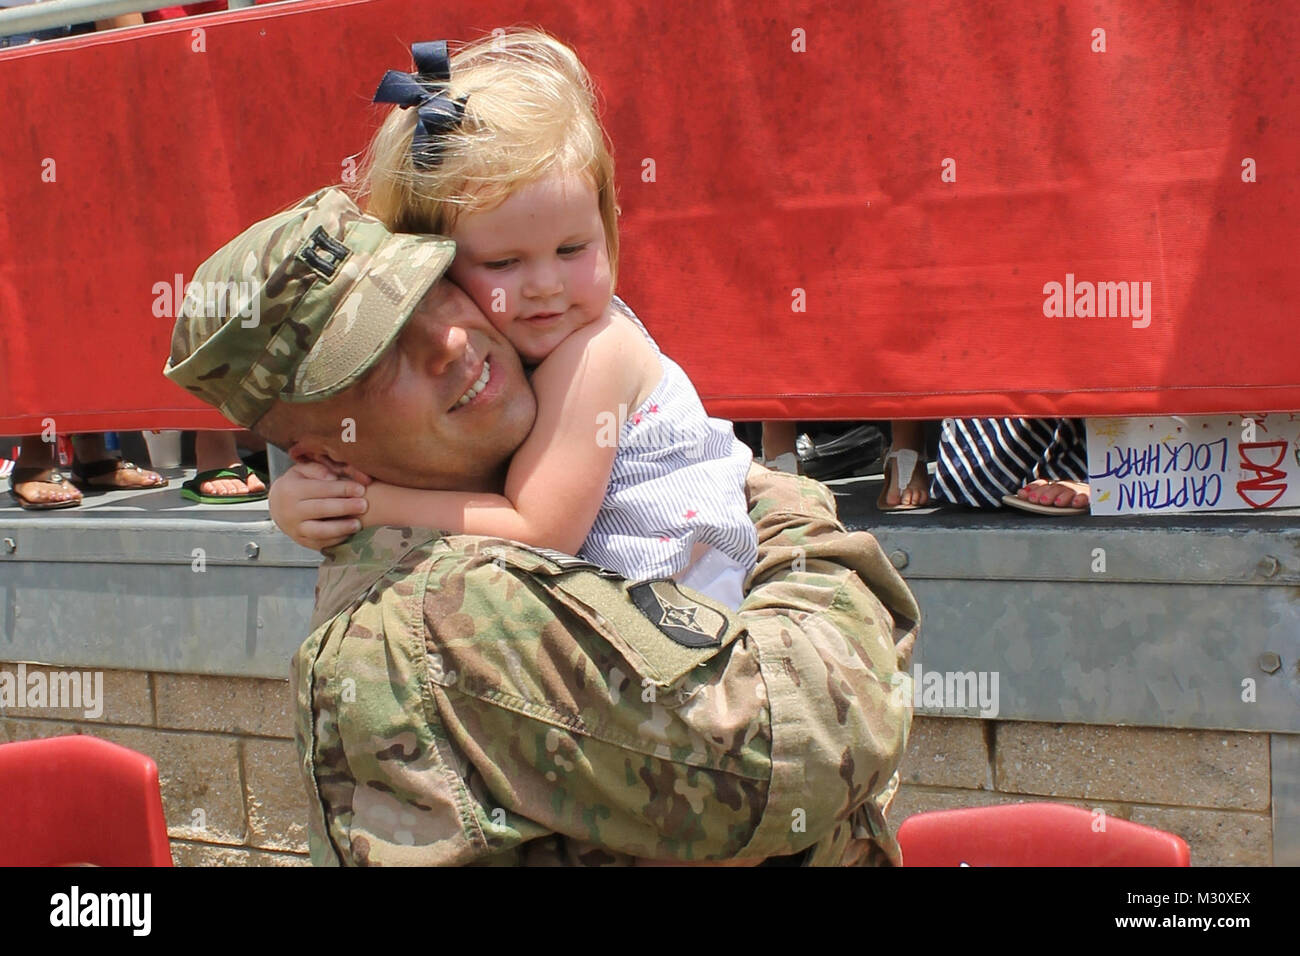 Capt. Brantley Lockhart, commander of the 1230th Transportation Company, hugs his daughter after the 1230th return ceremony at the Thomasville High School's football field May 31. The 1230th drove over 220,000 miles during their eleven month deployment to Afghanistan.  Georgia Army National Guard Photo by Maj. Will Cox | Released Home at last by Georgia National Guard Stock Photo